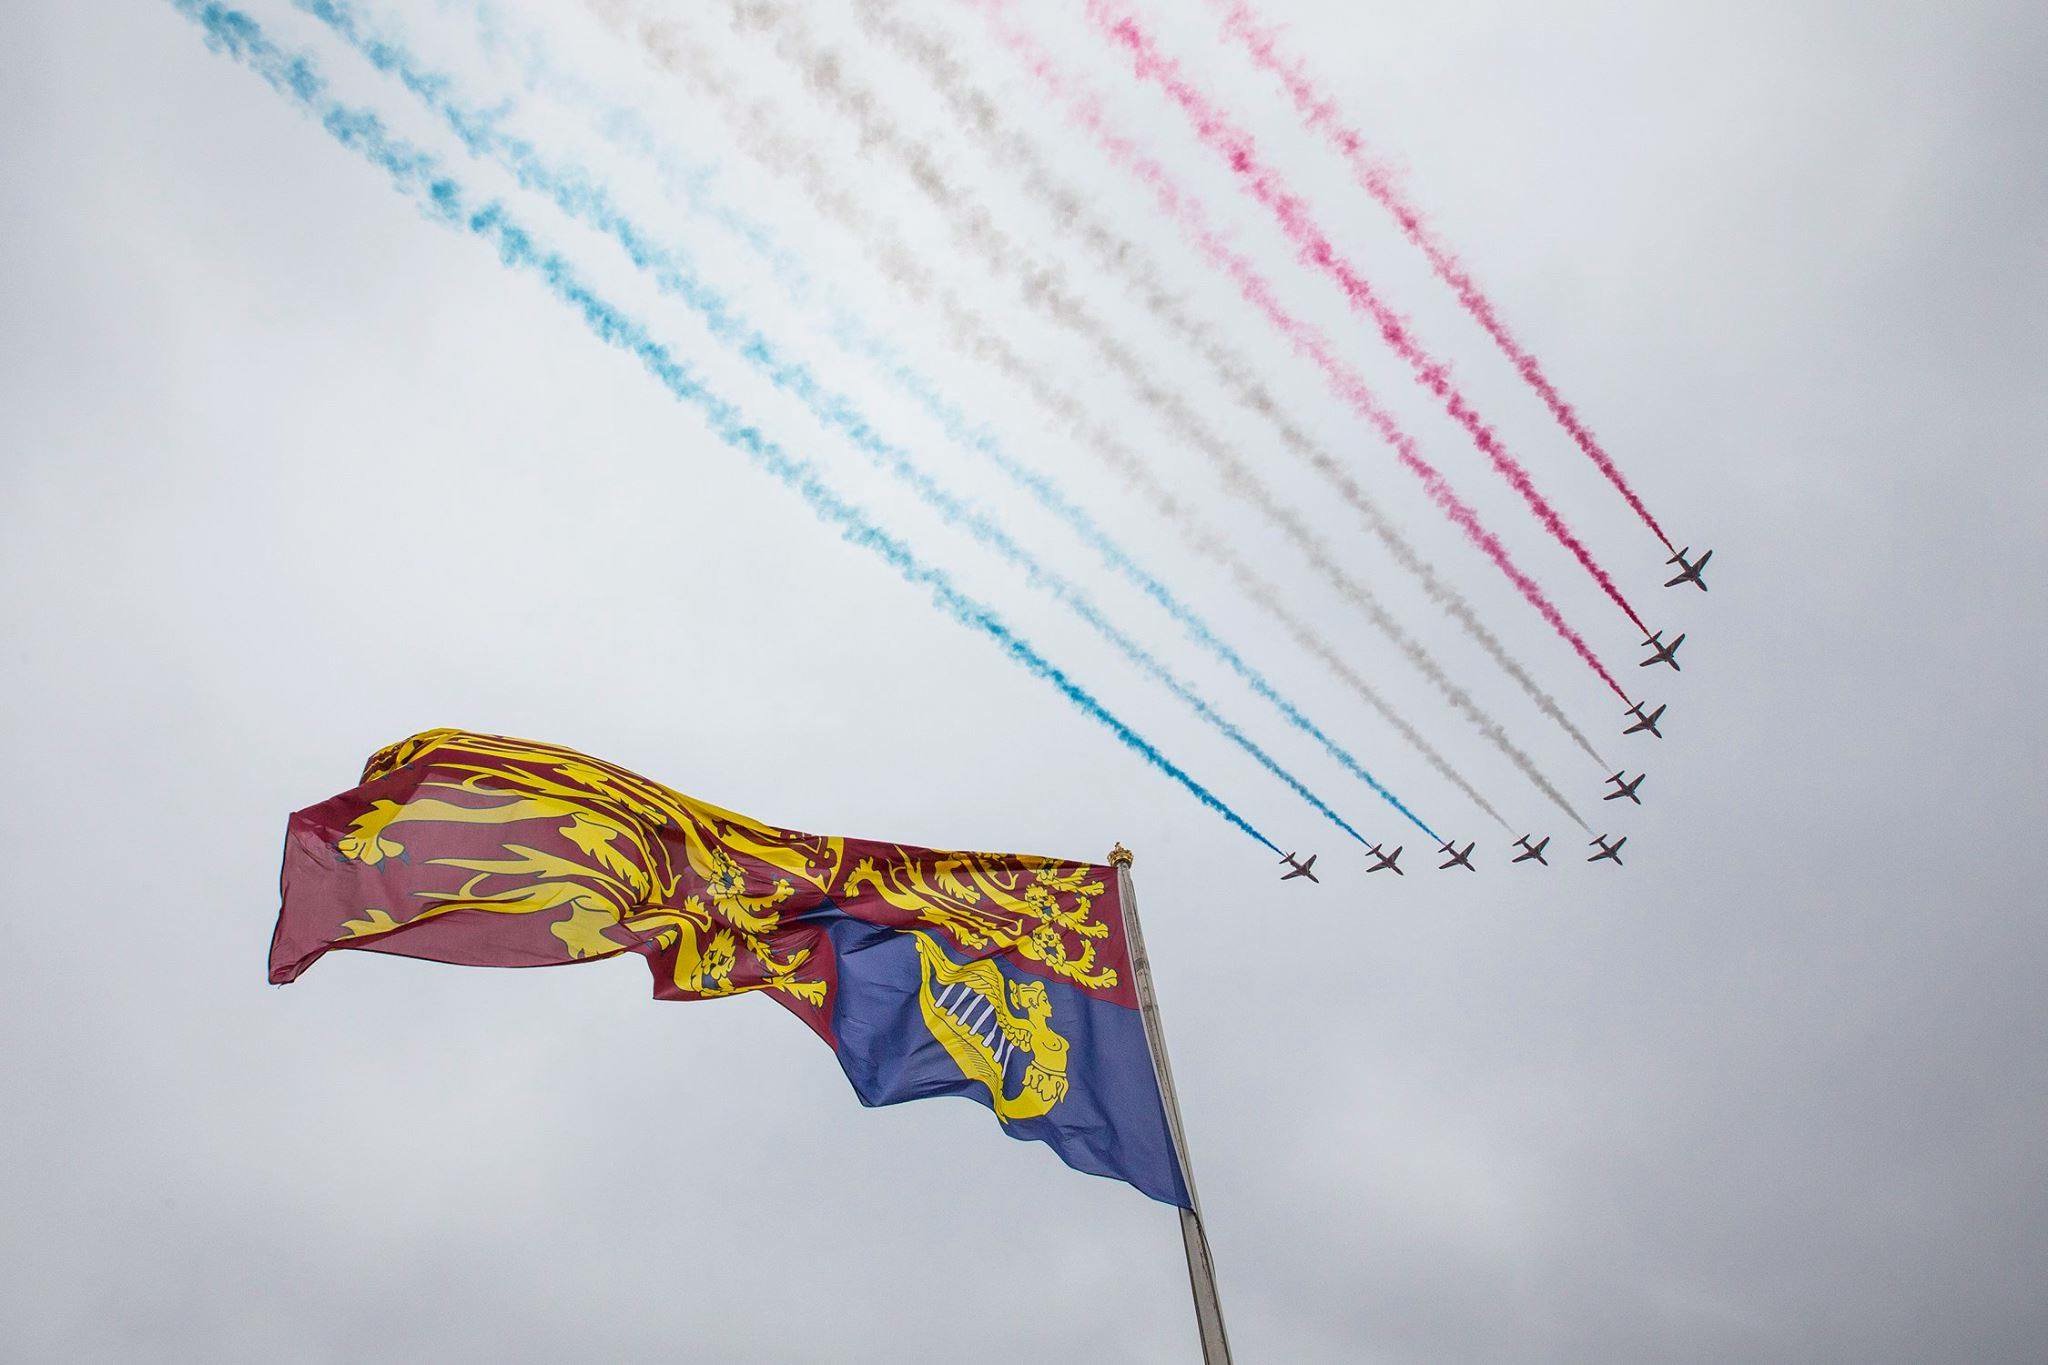 The Royal Standard of the United Kingdom flies under red, white, and blue flypast.